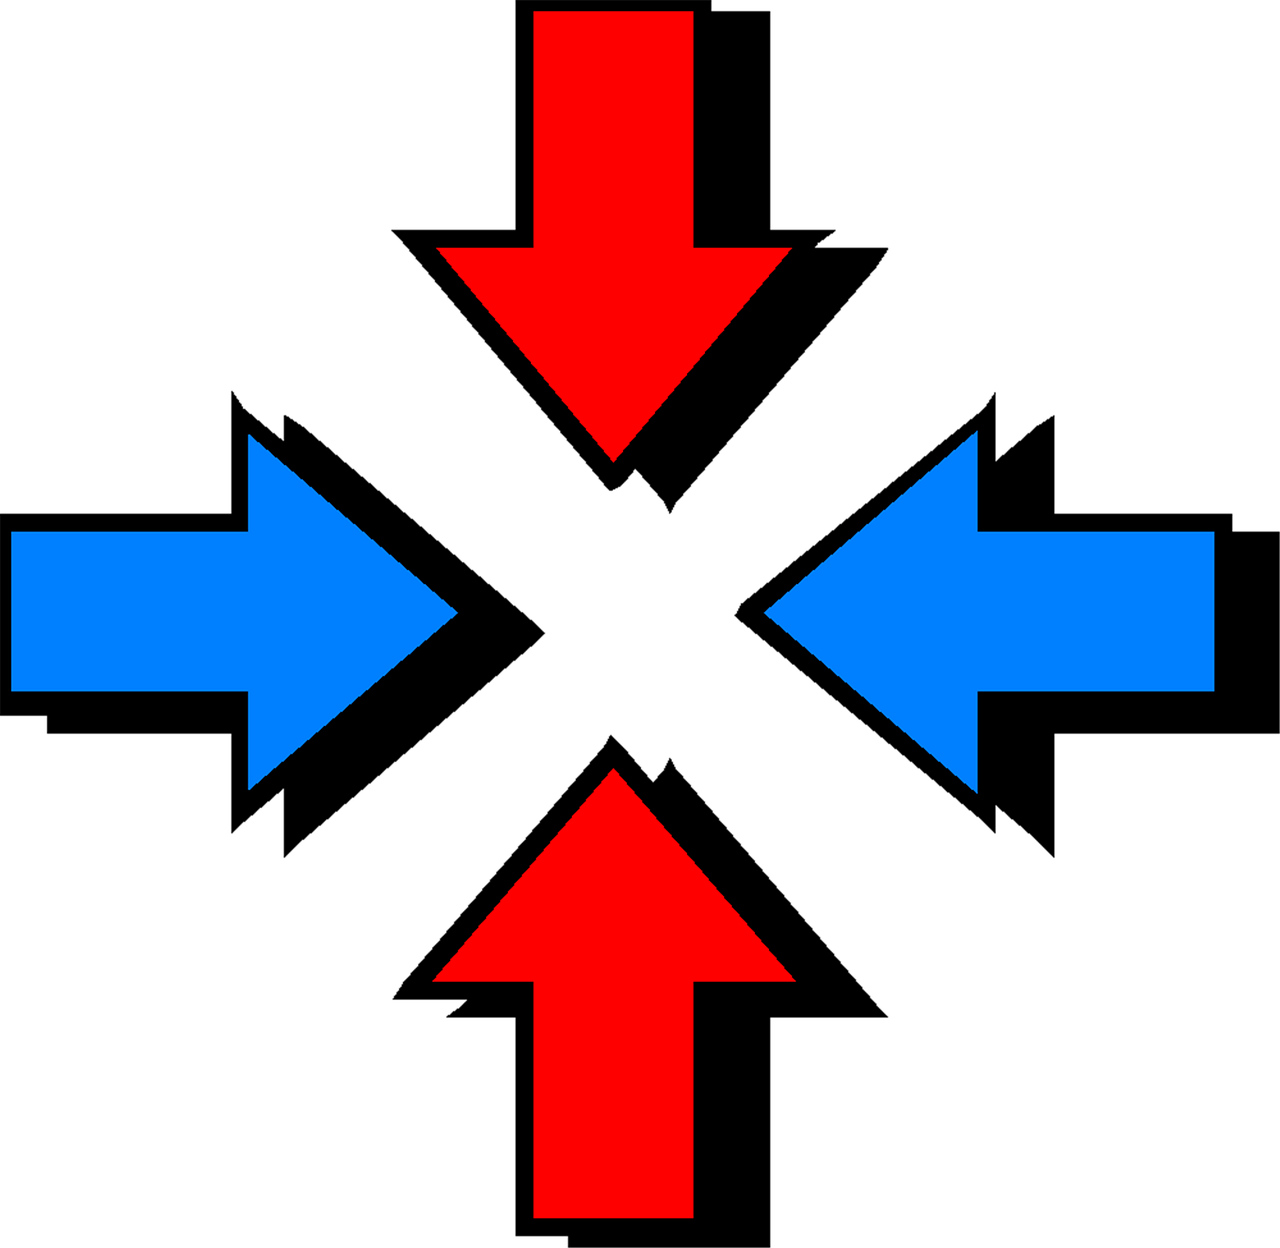 blue and red arrows pointing in opposite directions, a diagram, by Konrad Krzyżanowski, reddit, precisionism, magnetic, cross, contrast icon, rear facing